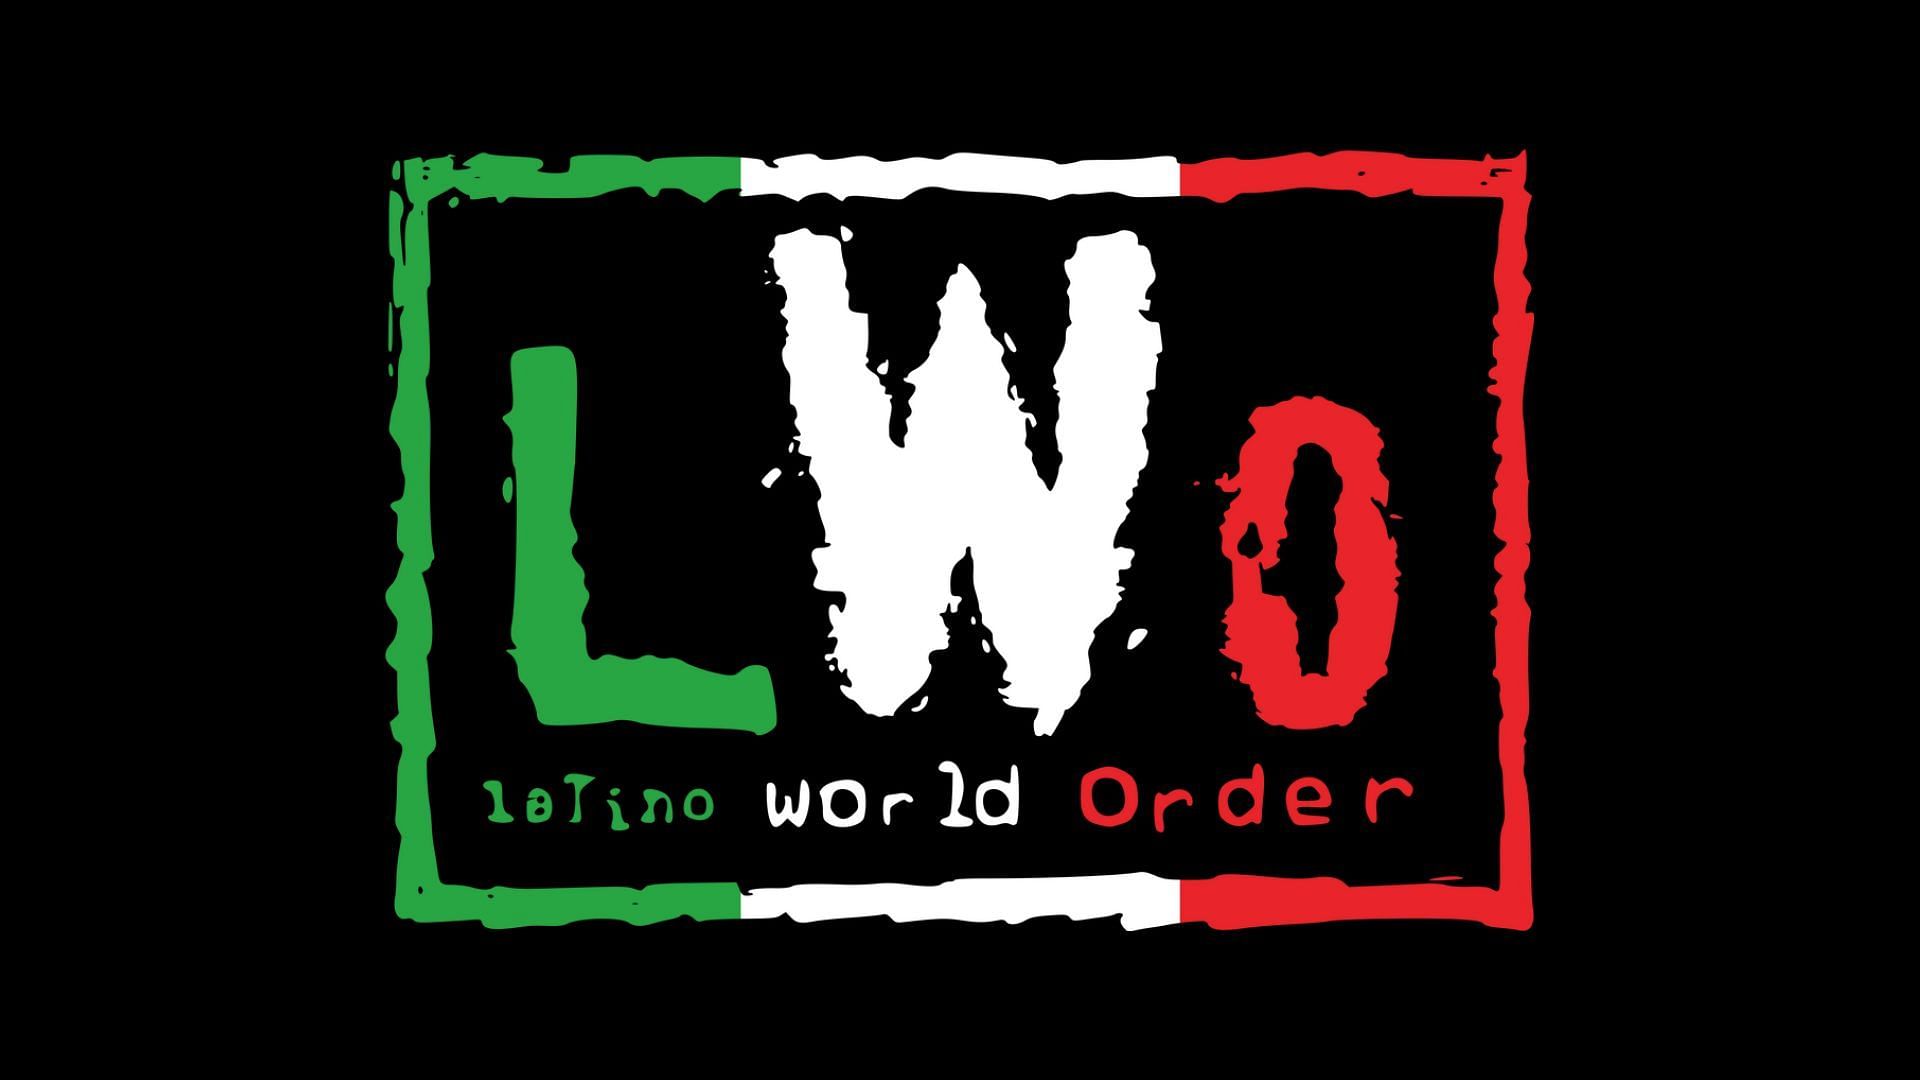 The LWO has proven popular with WWE fans